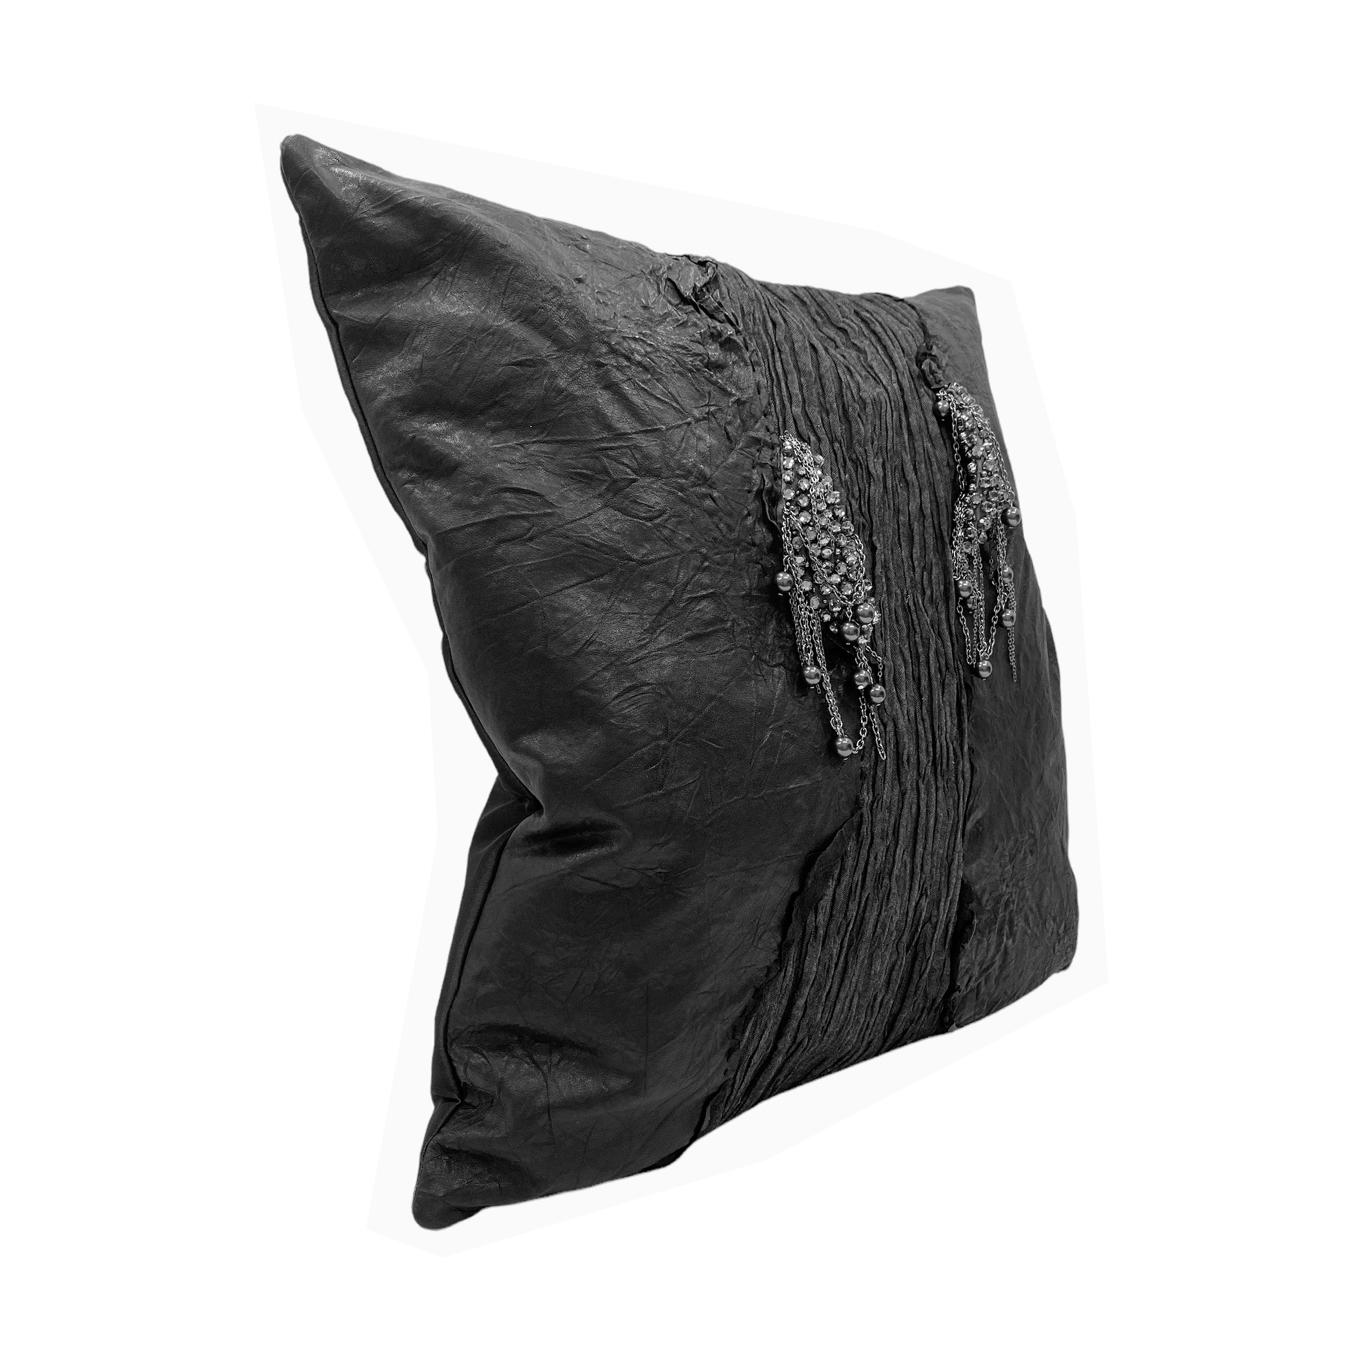 Authentic Italian wrinkled black leather pillow with hand-sewn crystals and sixteen real black.
pearls. This gives a perfect softness and sheen to the pillows, complementing any interior decorations These pillows were dreamt up by our in-house